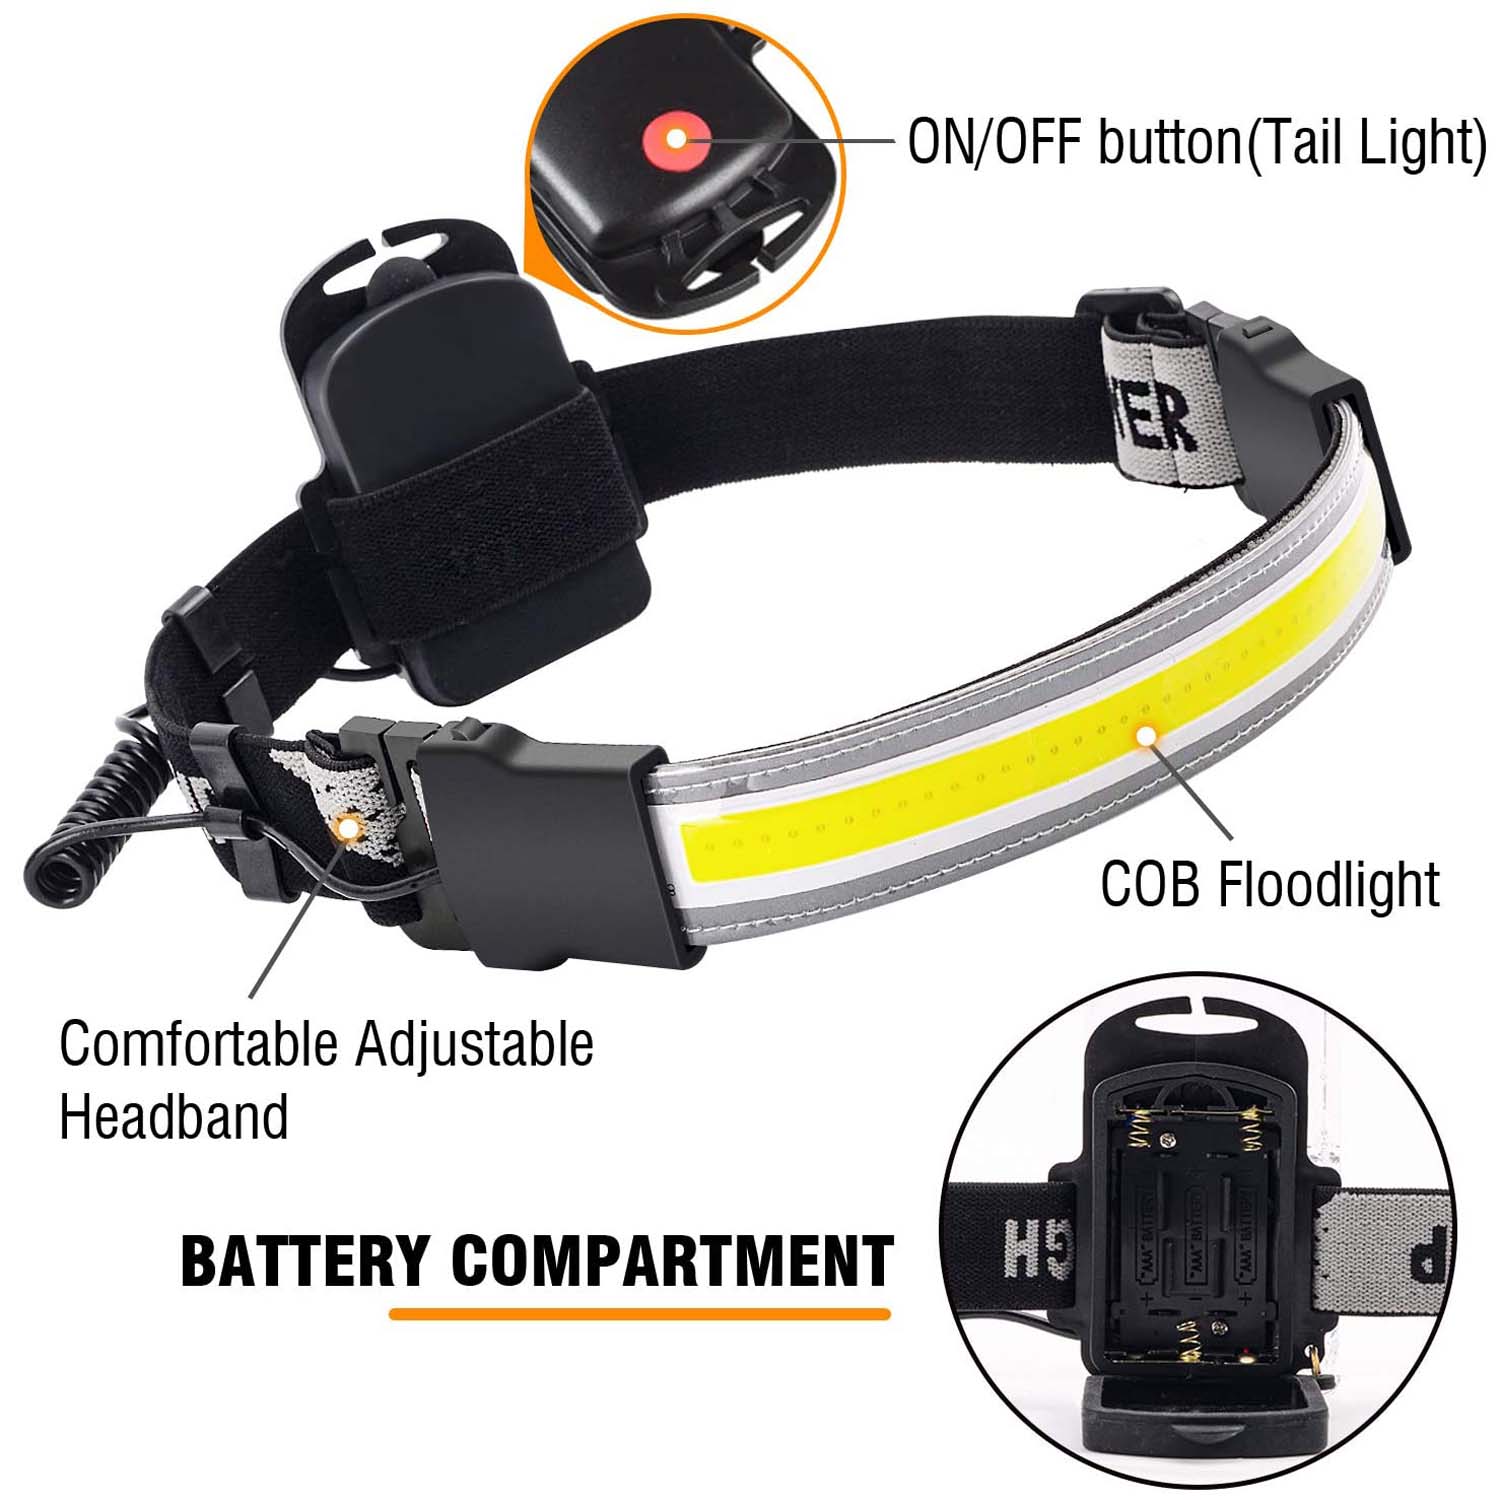 Headlamp flashlight, 2 pcs 2000 lumens LED 220° wide beam headlamp Lightweight COB bright headlamp Battery powered headlamp with 3 light modes, suitable for fishing, running and camping - image 3 of 8